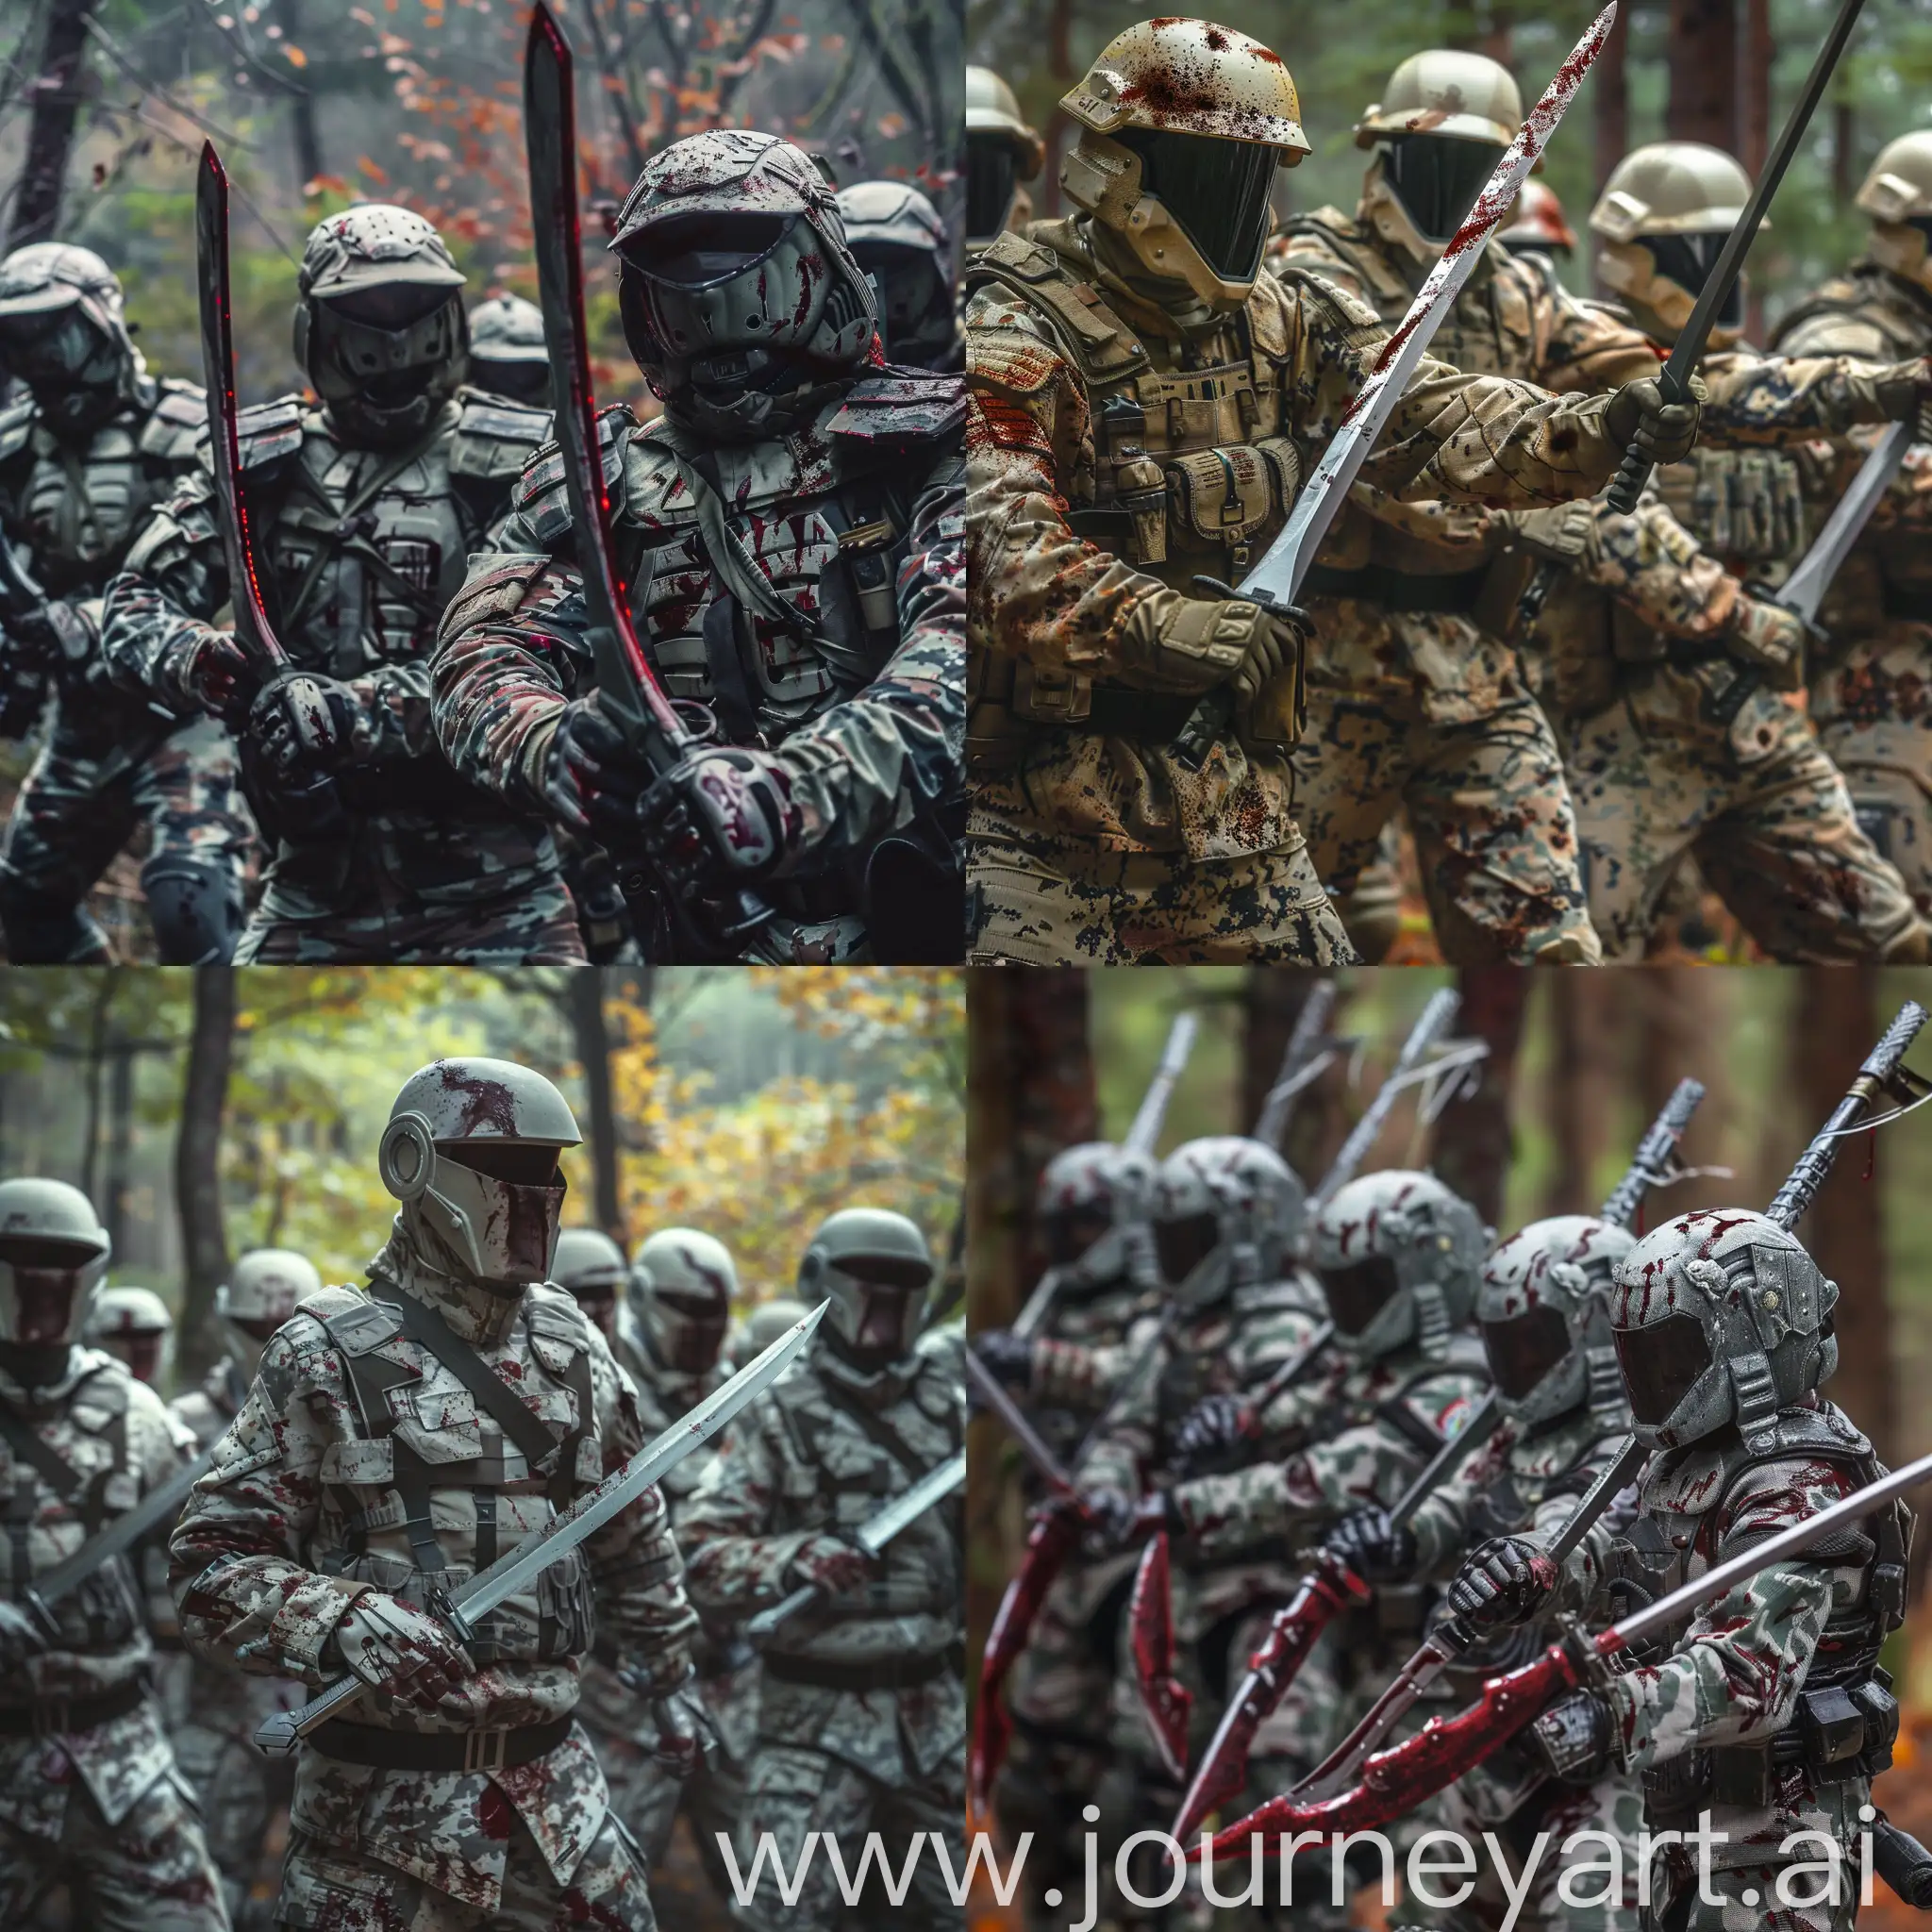 A squad of Dune sardaukar sci-fi soldiers armed with futuristic katana-like swords. Their camouflage tactical suits are lightly covered with their enemies blood. They are stationed in the forest, and are eager for battle. They are wearing an SS-like uniform and  they are professional mercenaries.